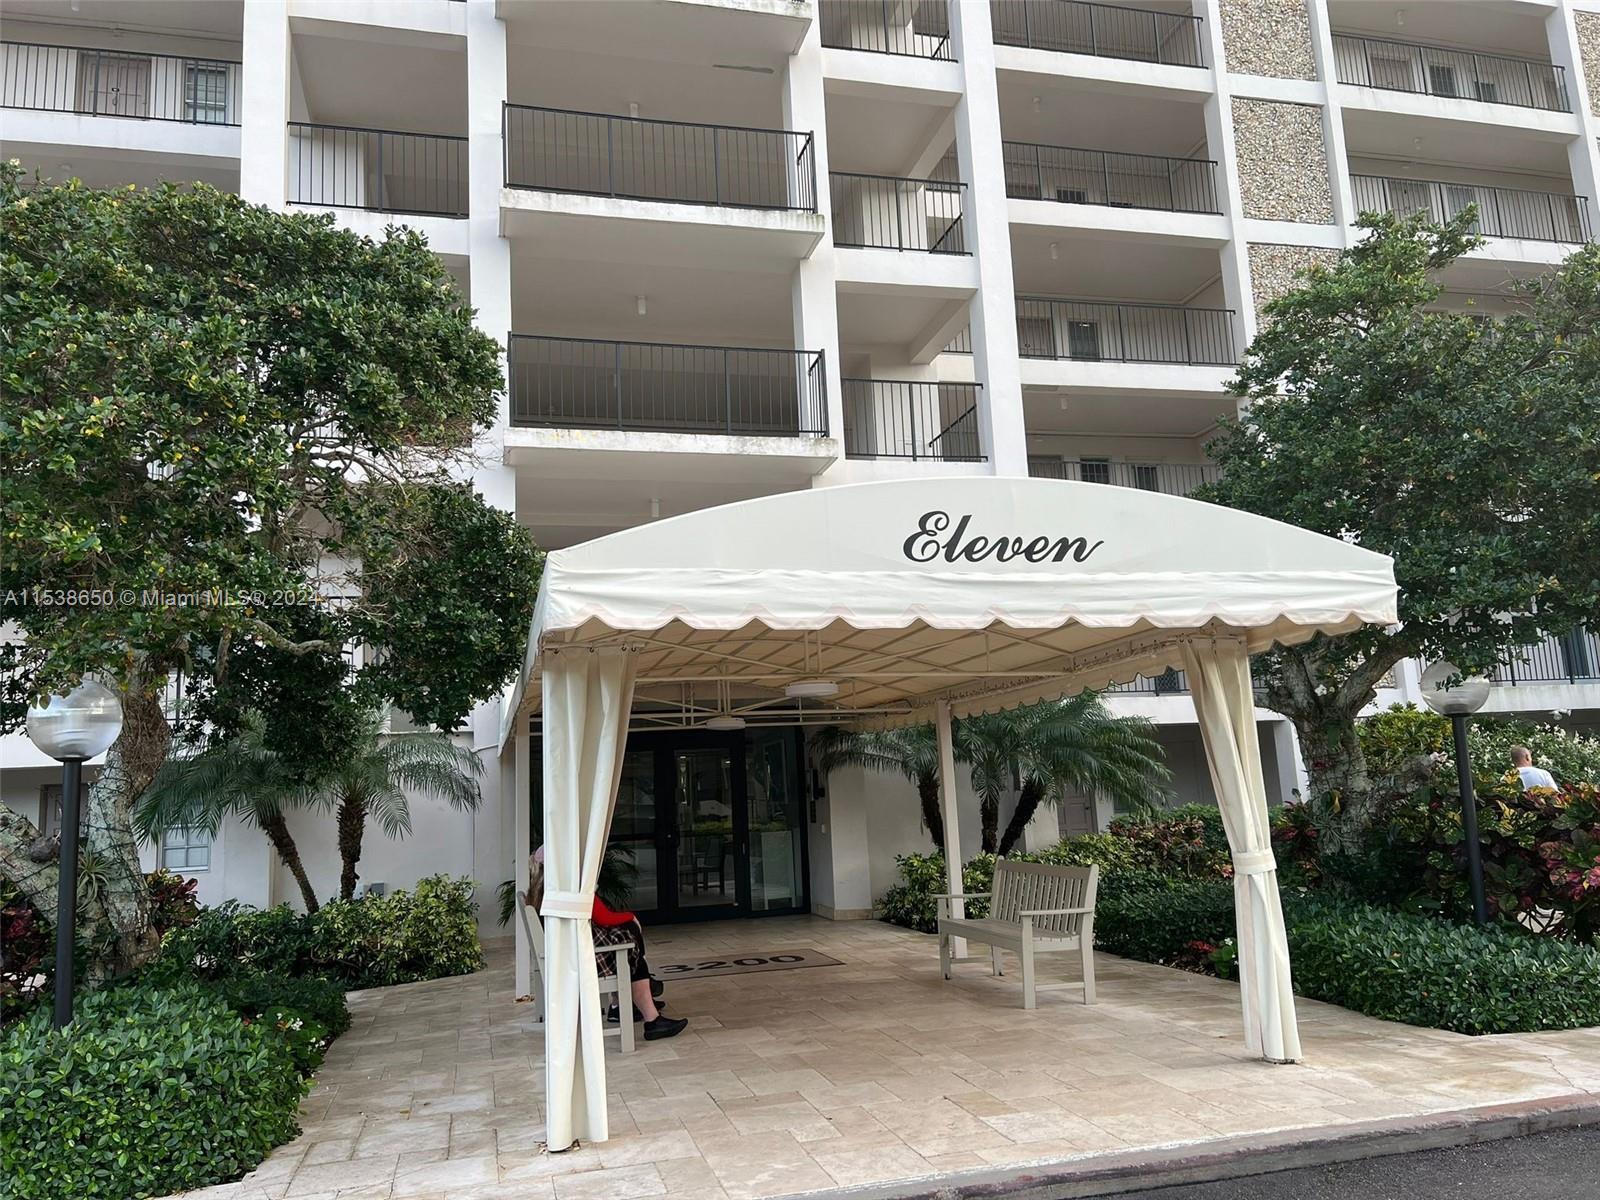 Photo of 3200 N Palm Aire Dr #101 in Pompano Beach, FL